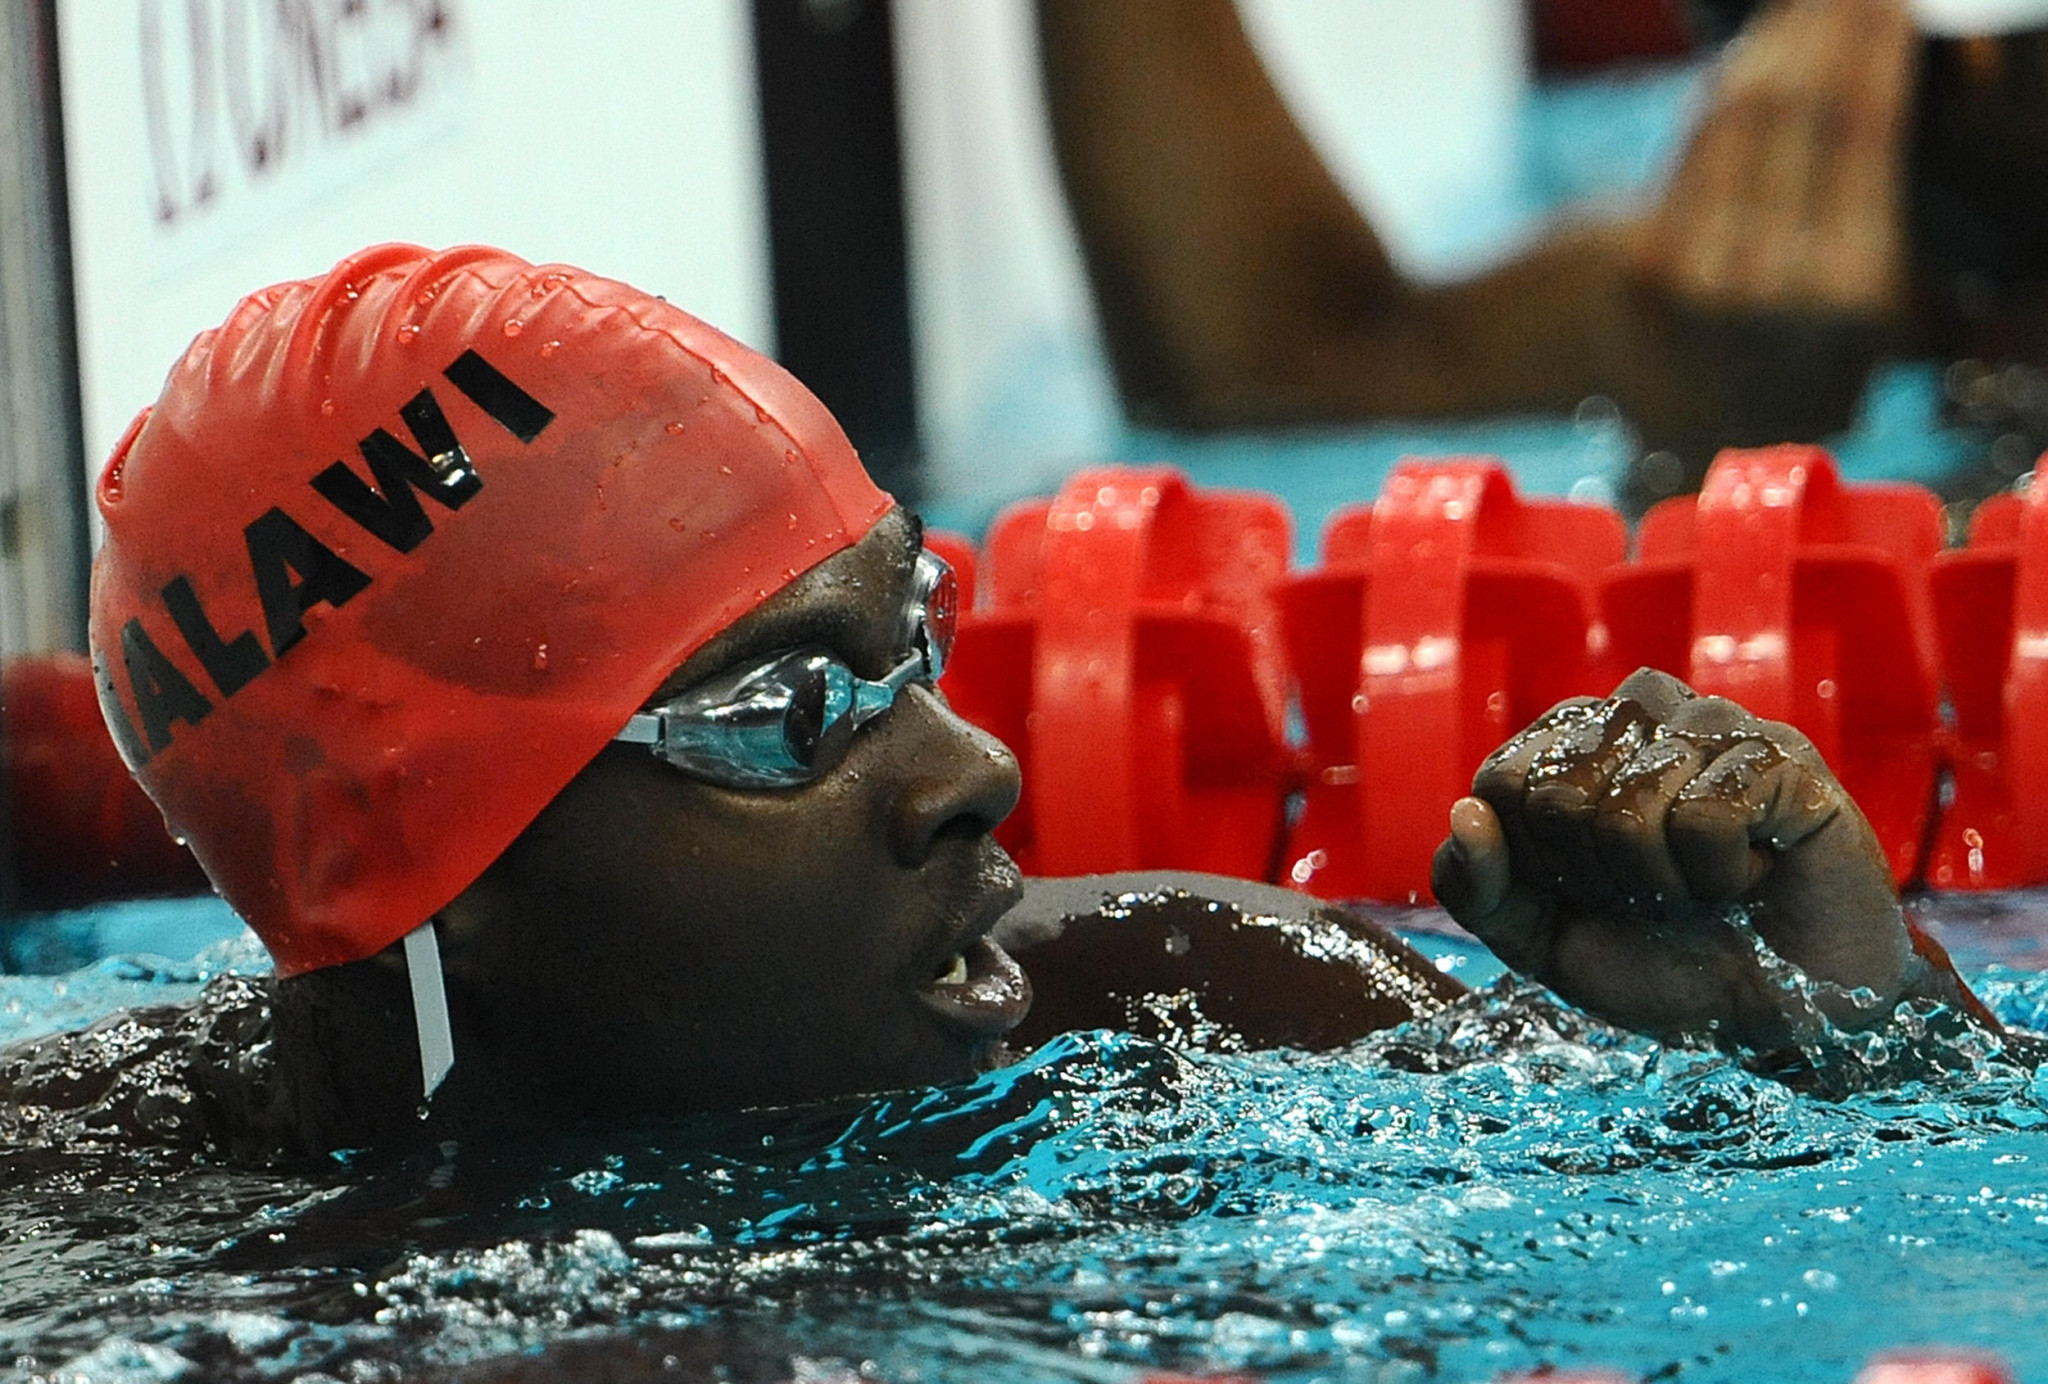 Malawi is still awaiting its first Olympic medal ©Getty Images